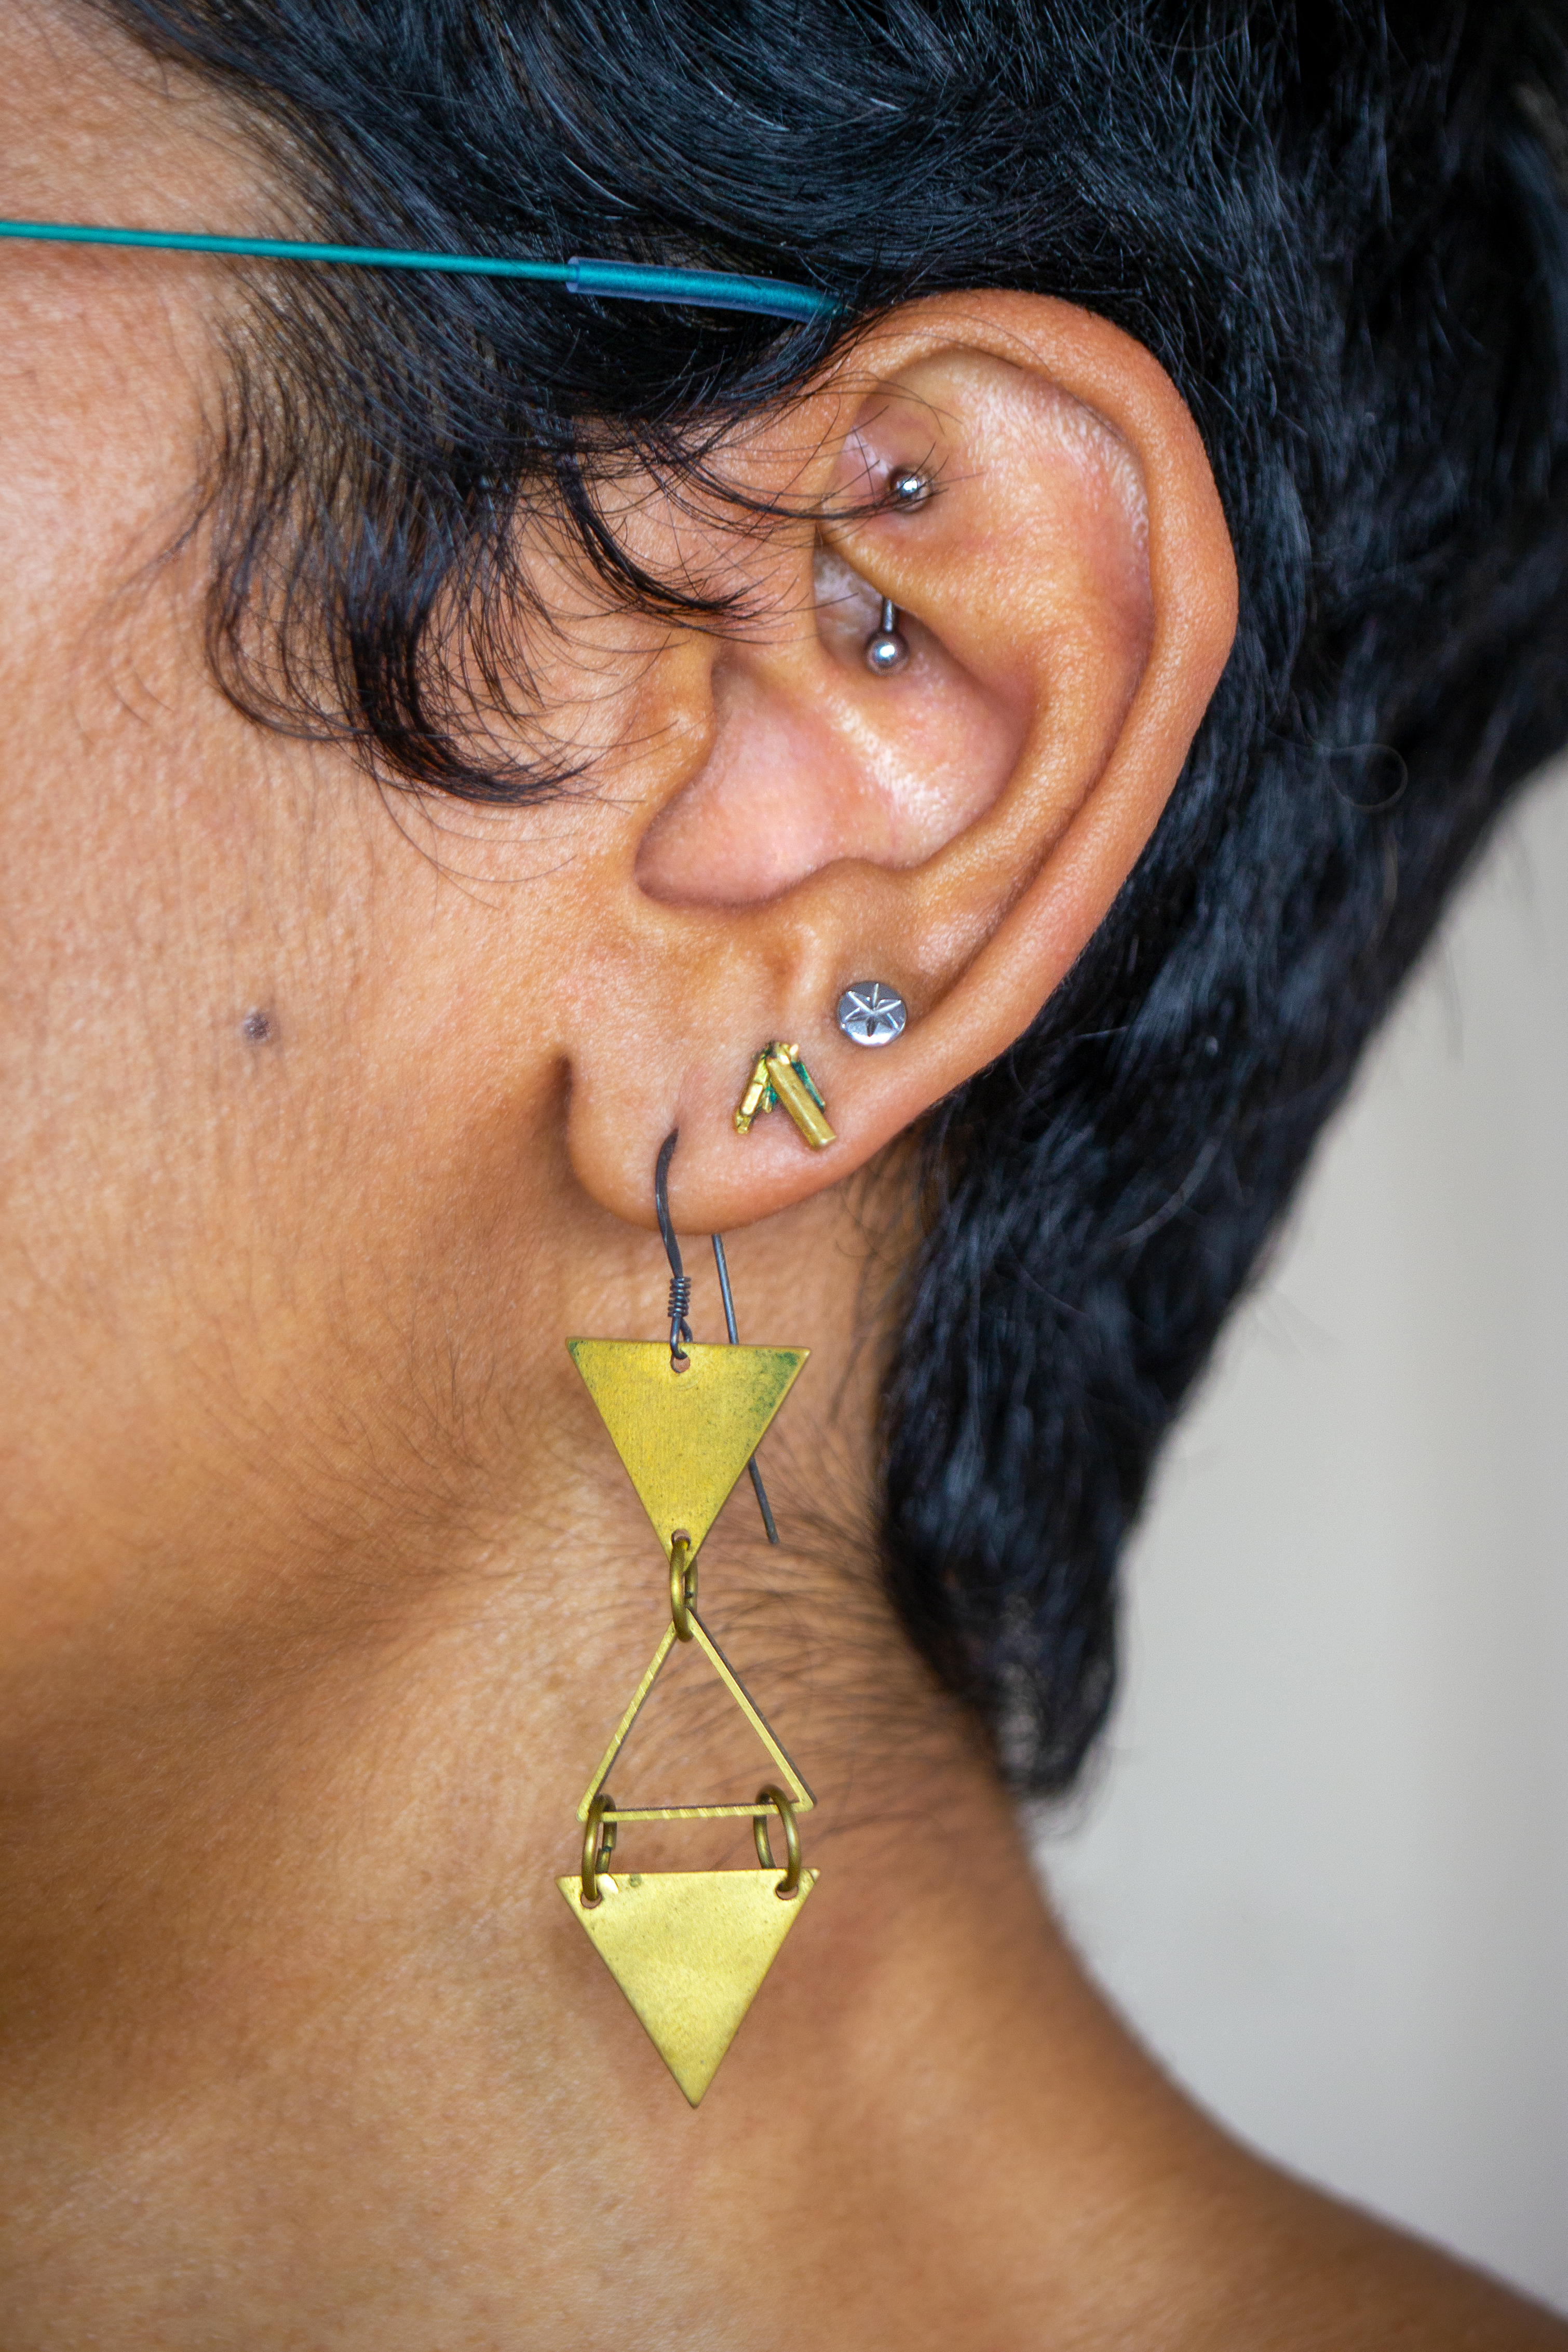 A brown ear with rook and lobe piercings.